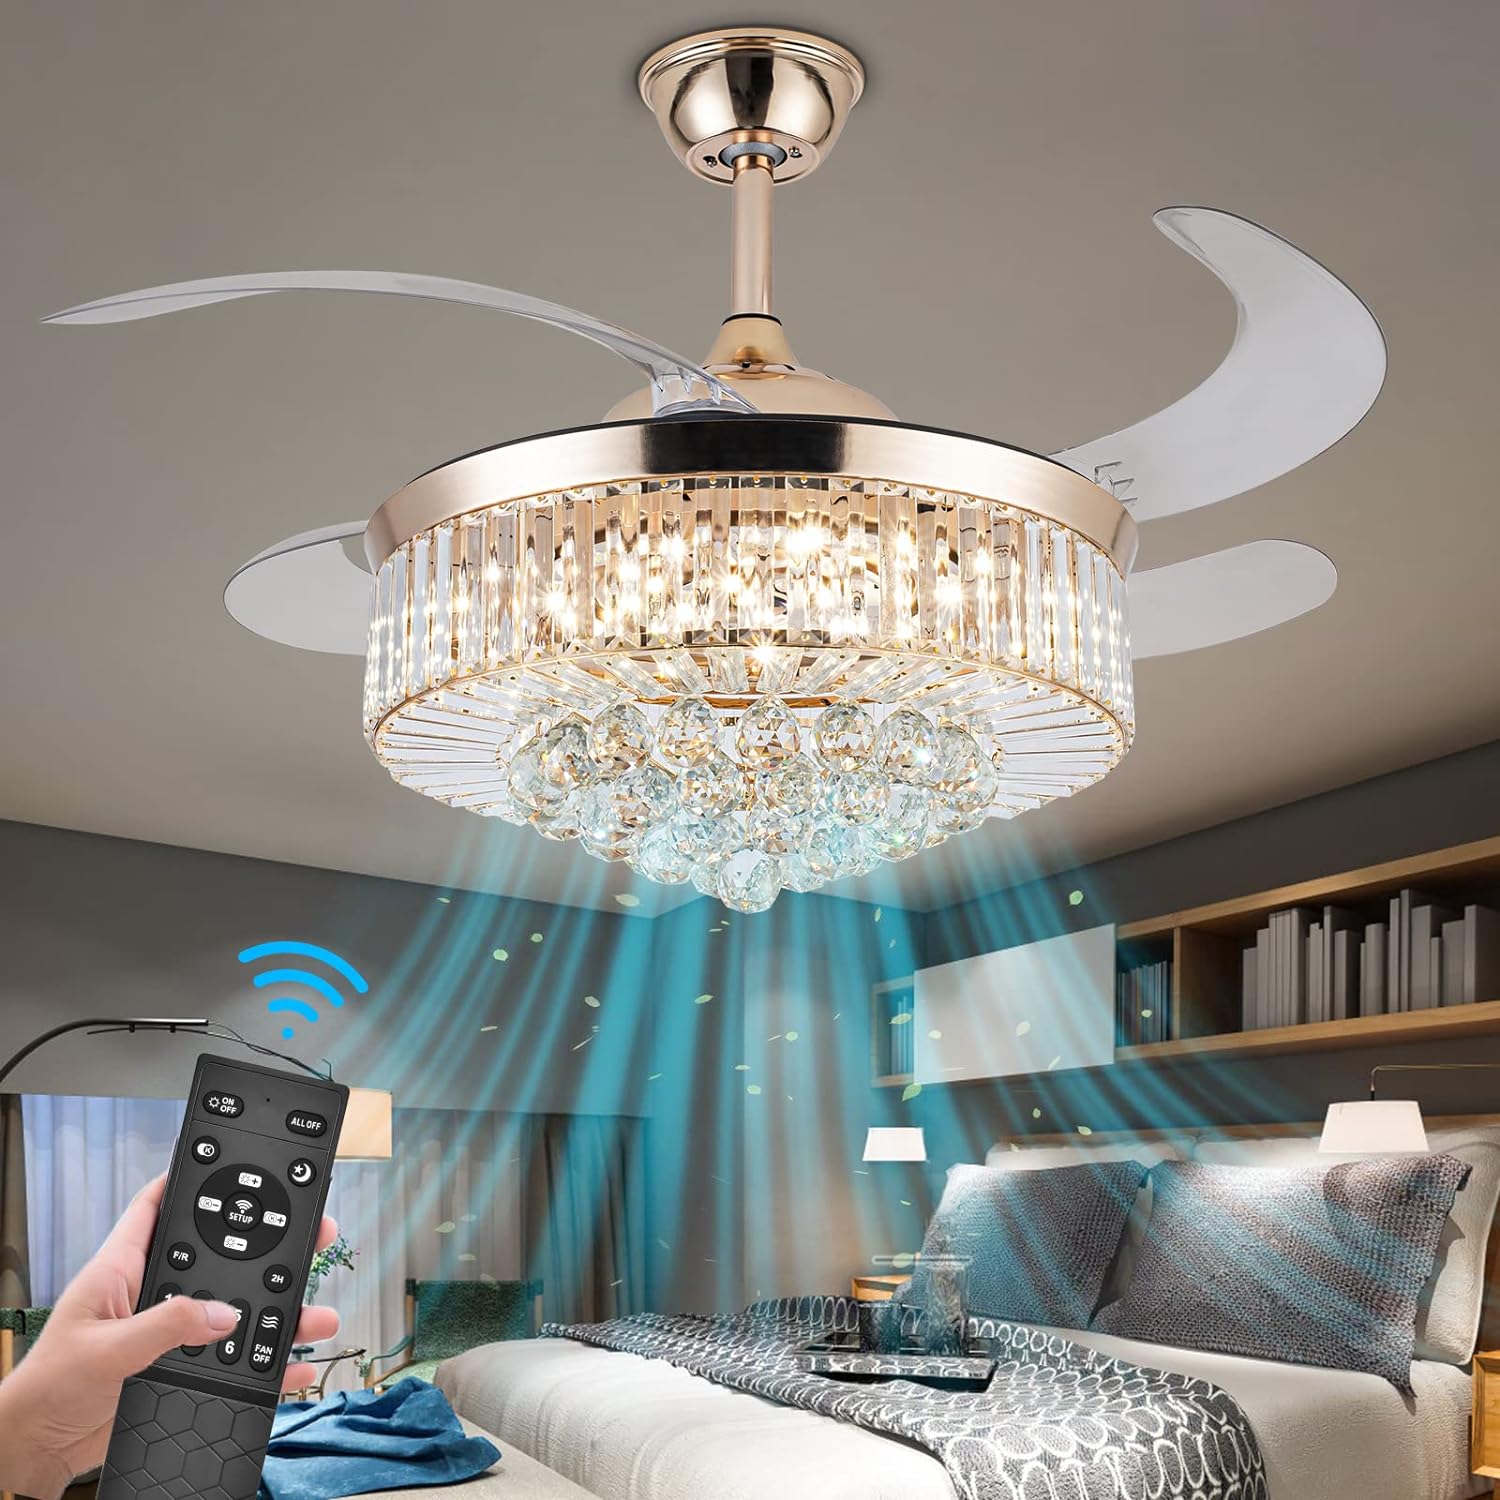 Save Big on Your Purchase! 42'' Reversible Chandelier Crystal Ceiling Fan - Stepless Dimming, Remote Control, Retractable Blades